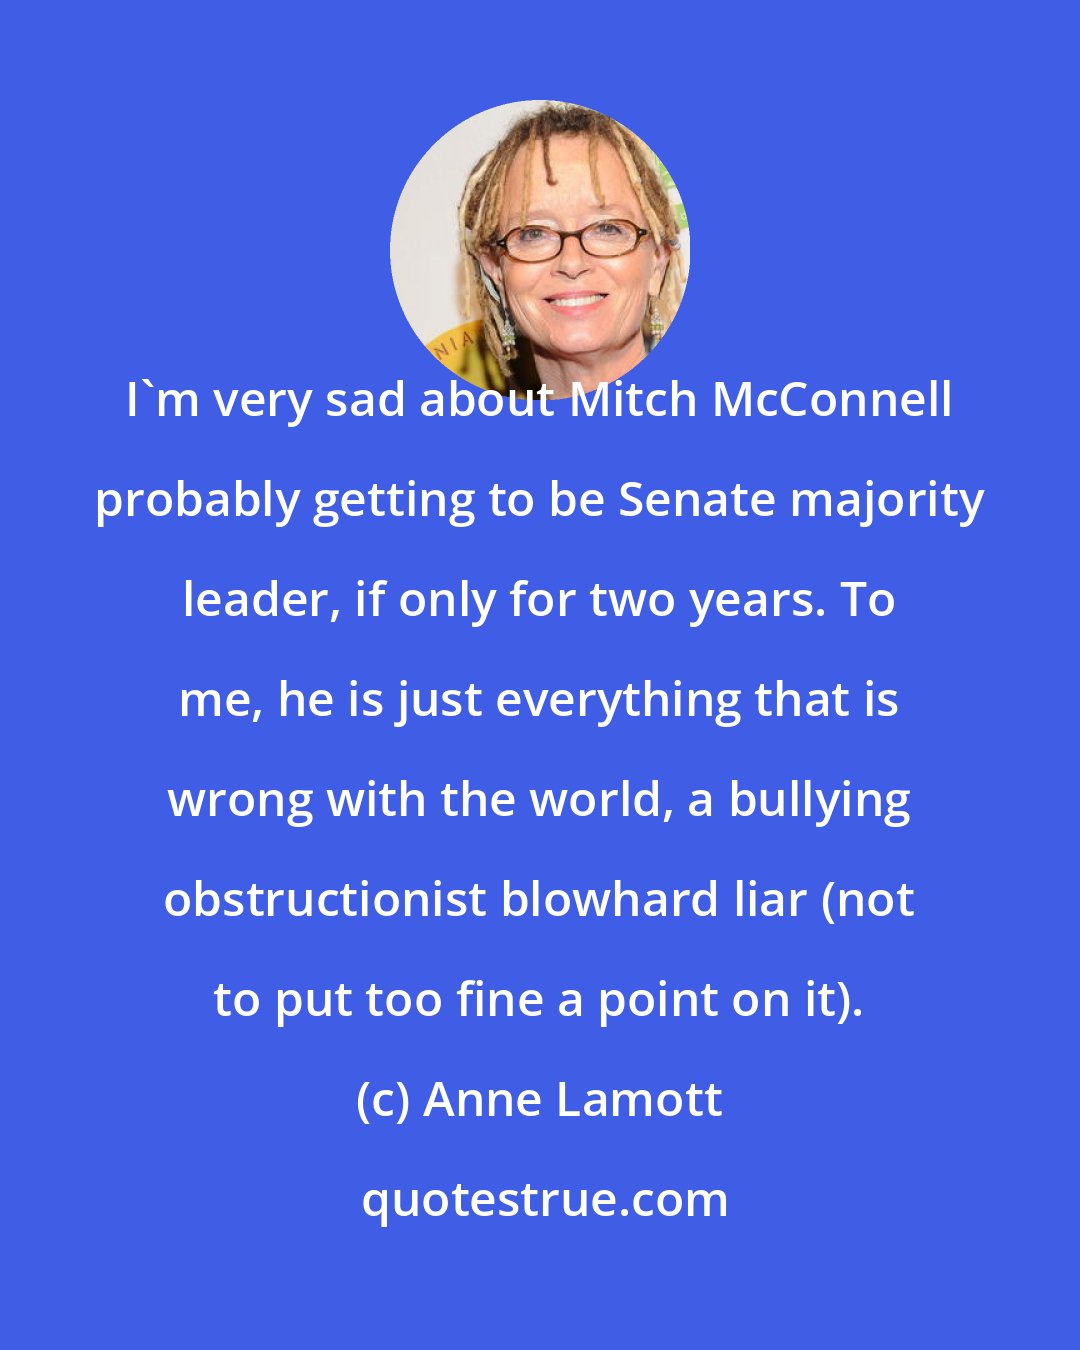 Anne Lamott: I'm very sad about Mitch McConnell probably getting to be Senate majority leader, if only for two years. To me, he is just everything that is wrong with the world, a bullying obstructionist blowhard liar (not to put too fine a point on it).